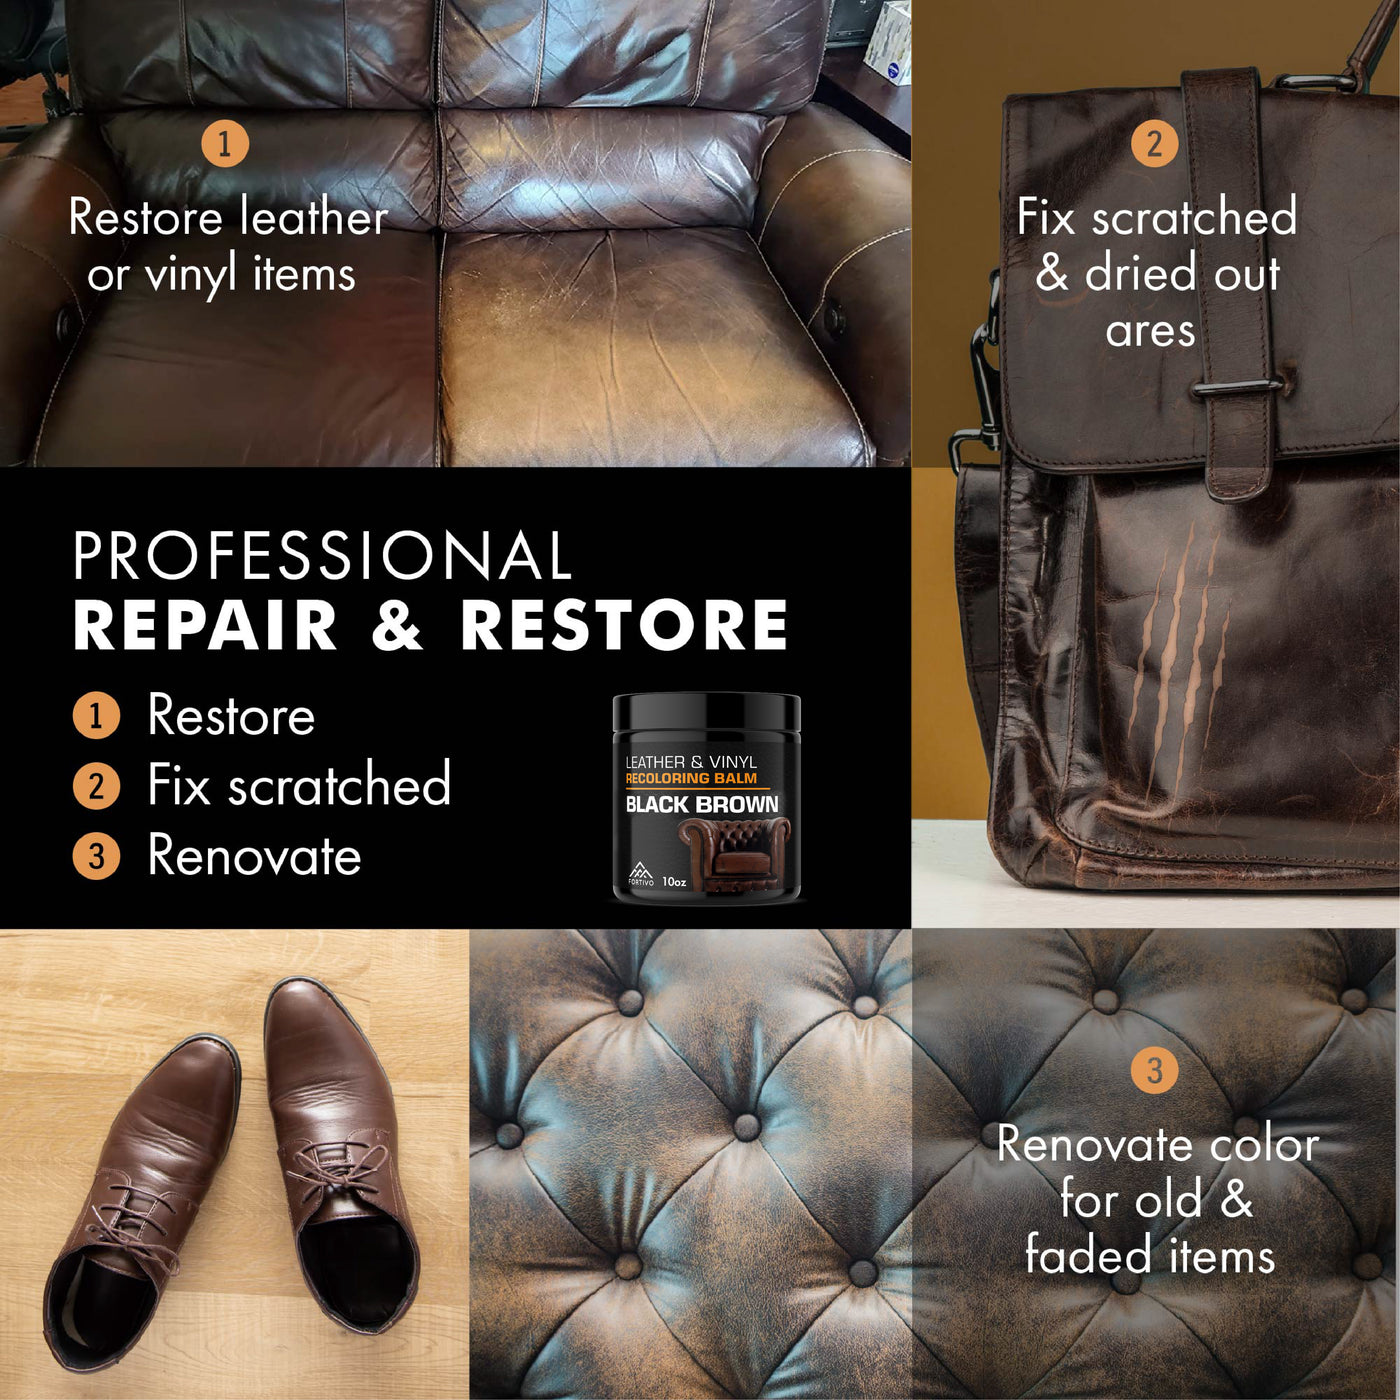 repair, restore, and rejuvenate leather couch